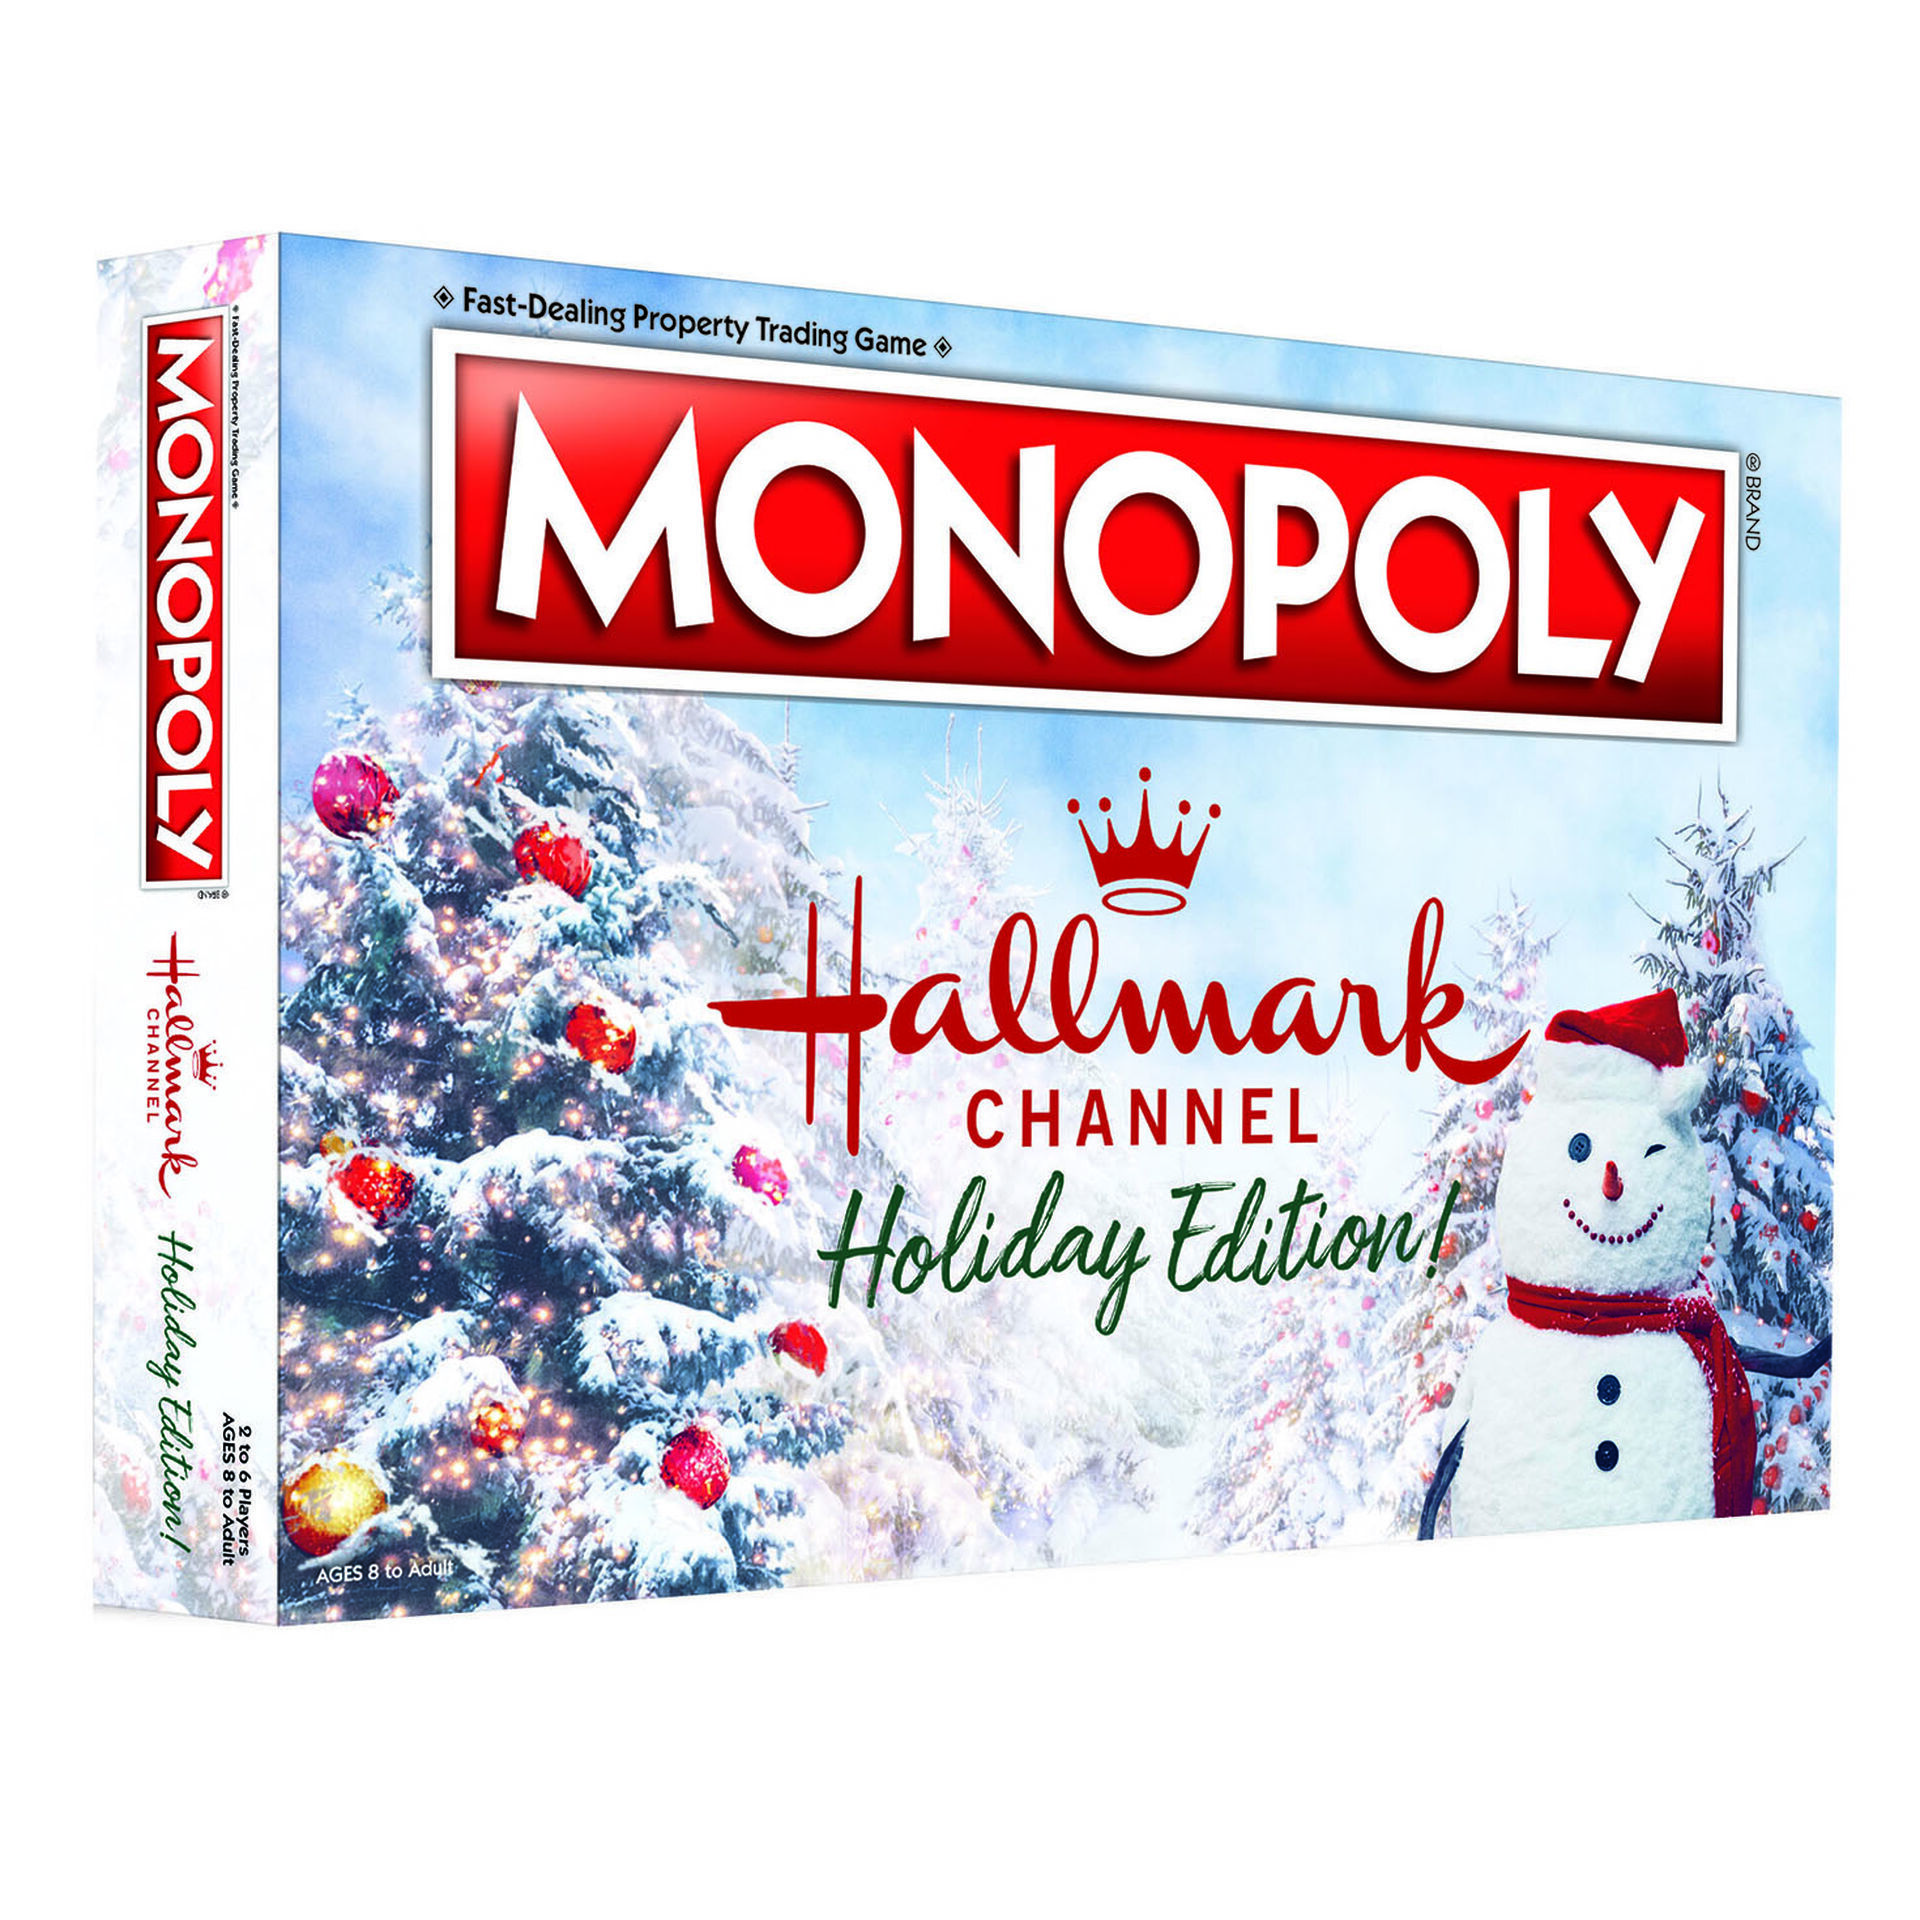 Monopoly Hallmark Channel Holiday Edition Board Game